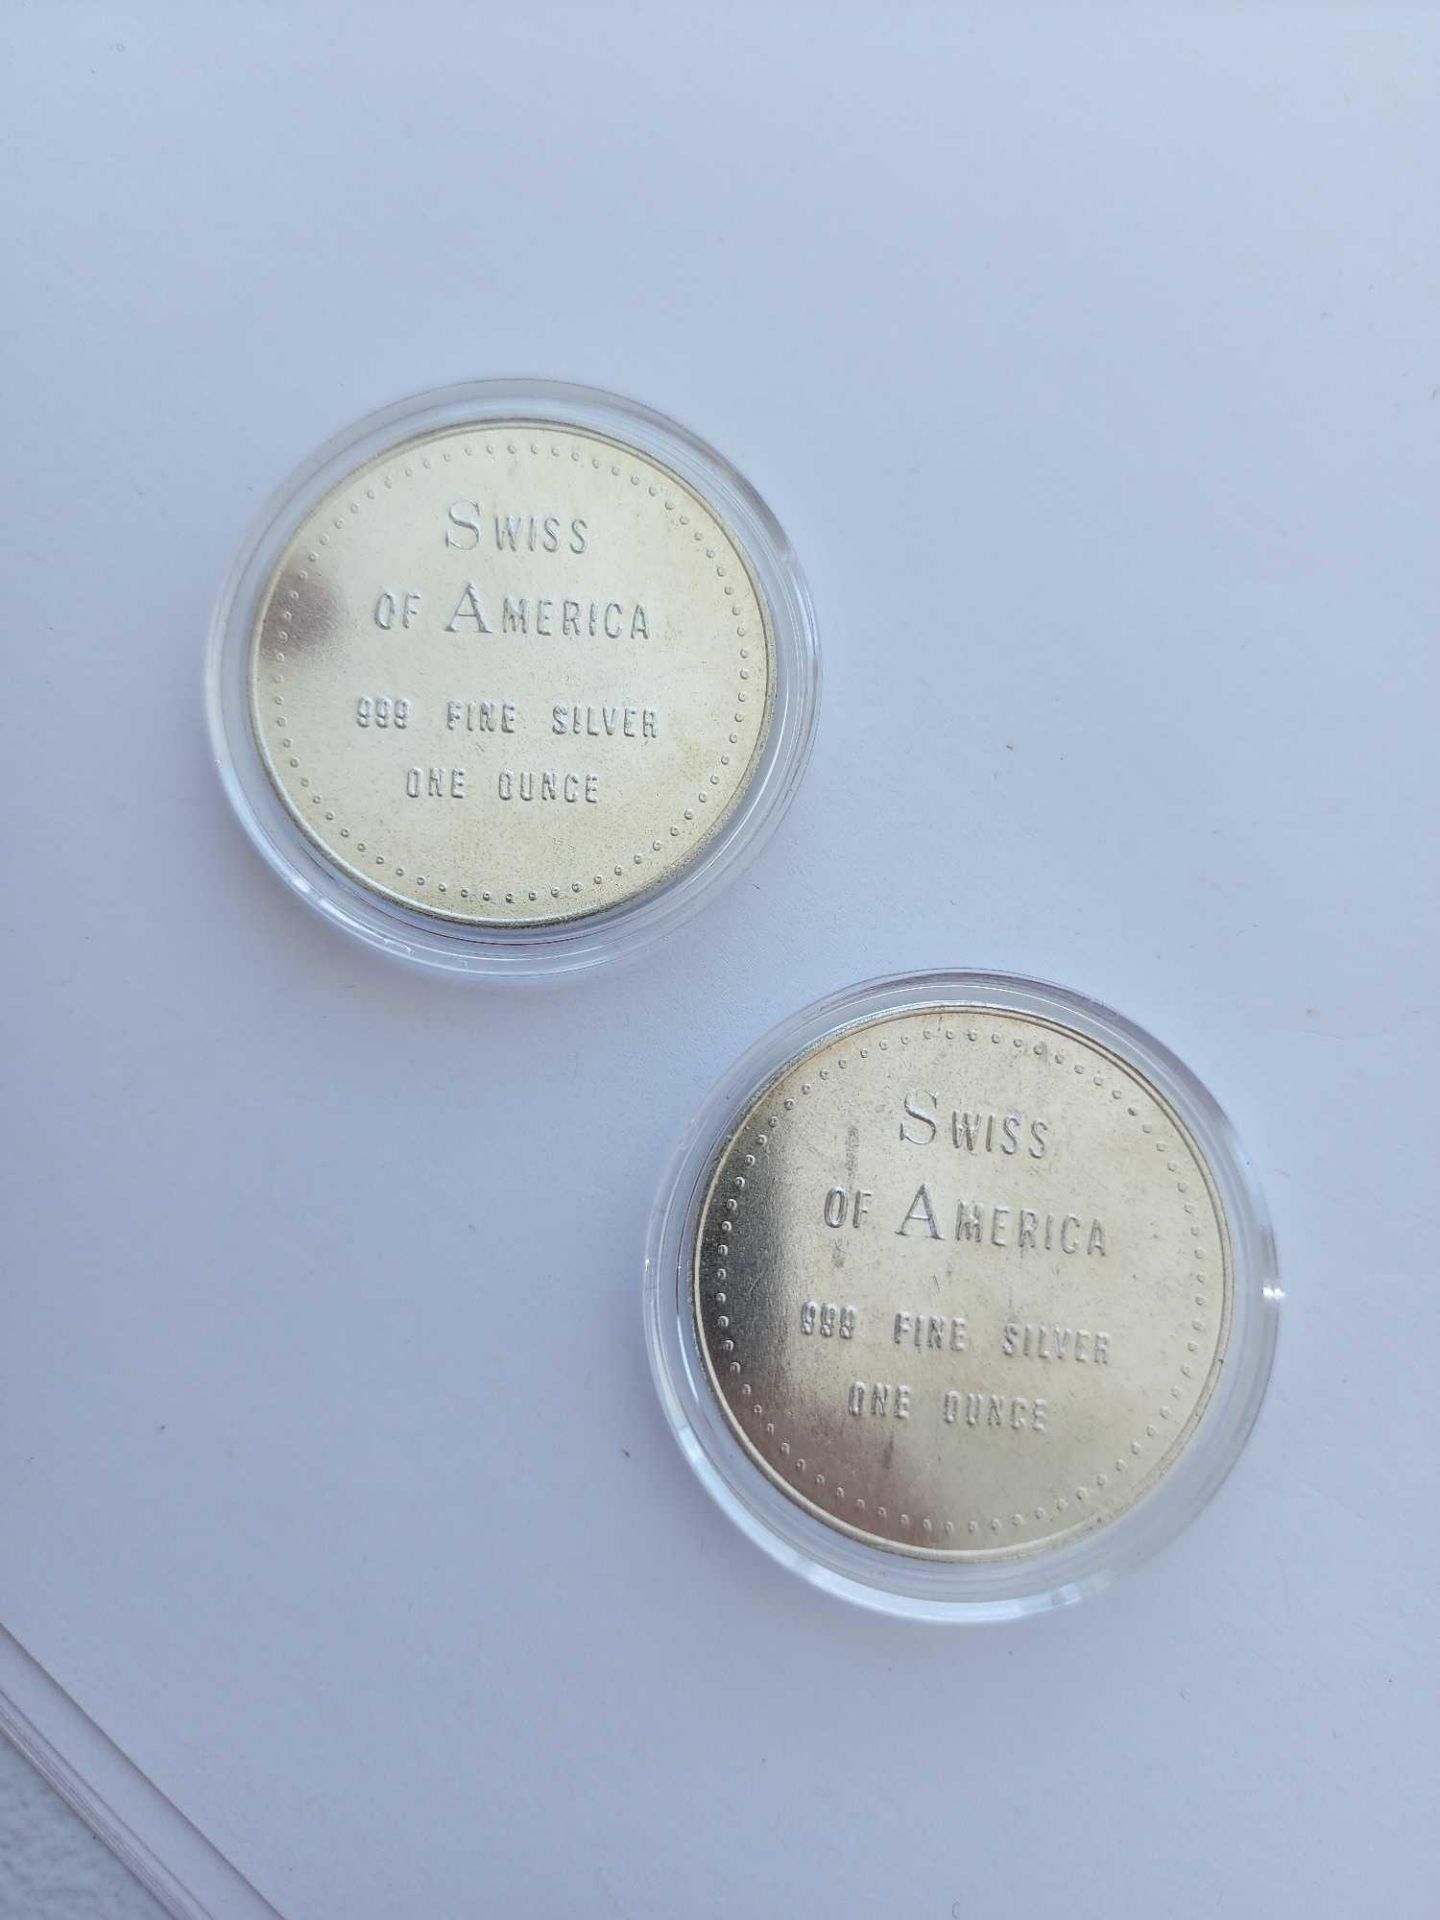 2 Swiss of America Silver Coins - Image 2 of 2